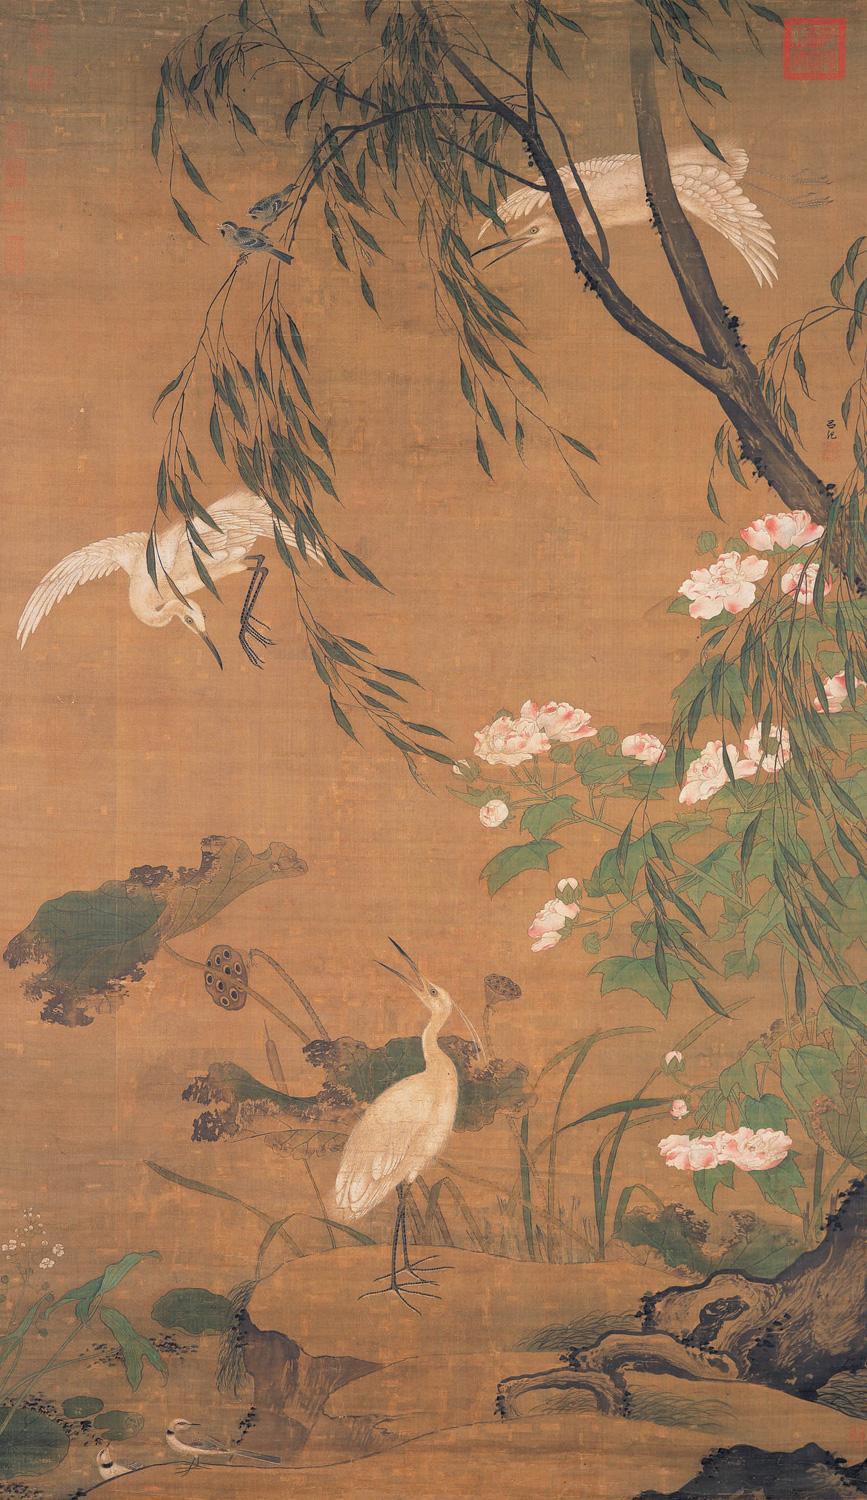 "Autumn Egrets and Hibiscus, Ming Dynasty," by Lu Ji (1439–1505). Ink and color on silk hanging scroll, 75.8 inches by 44 inches. (National Palace Museum, Taipei)